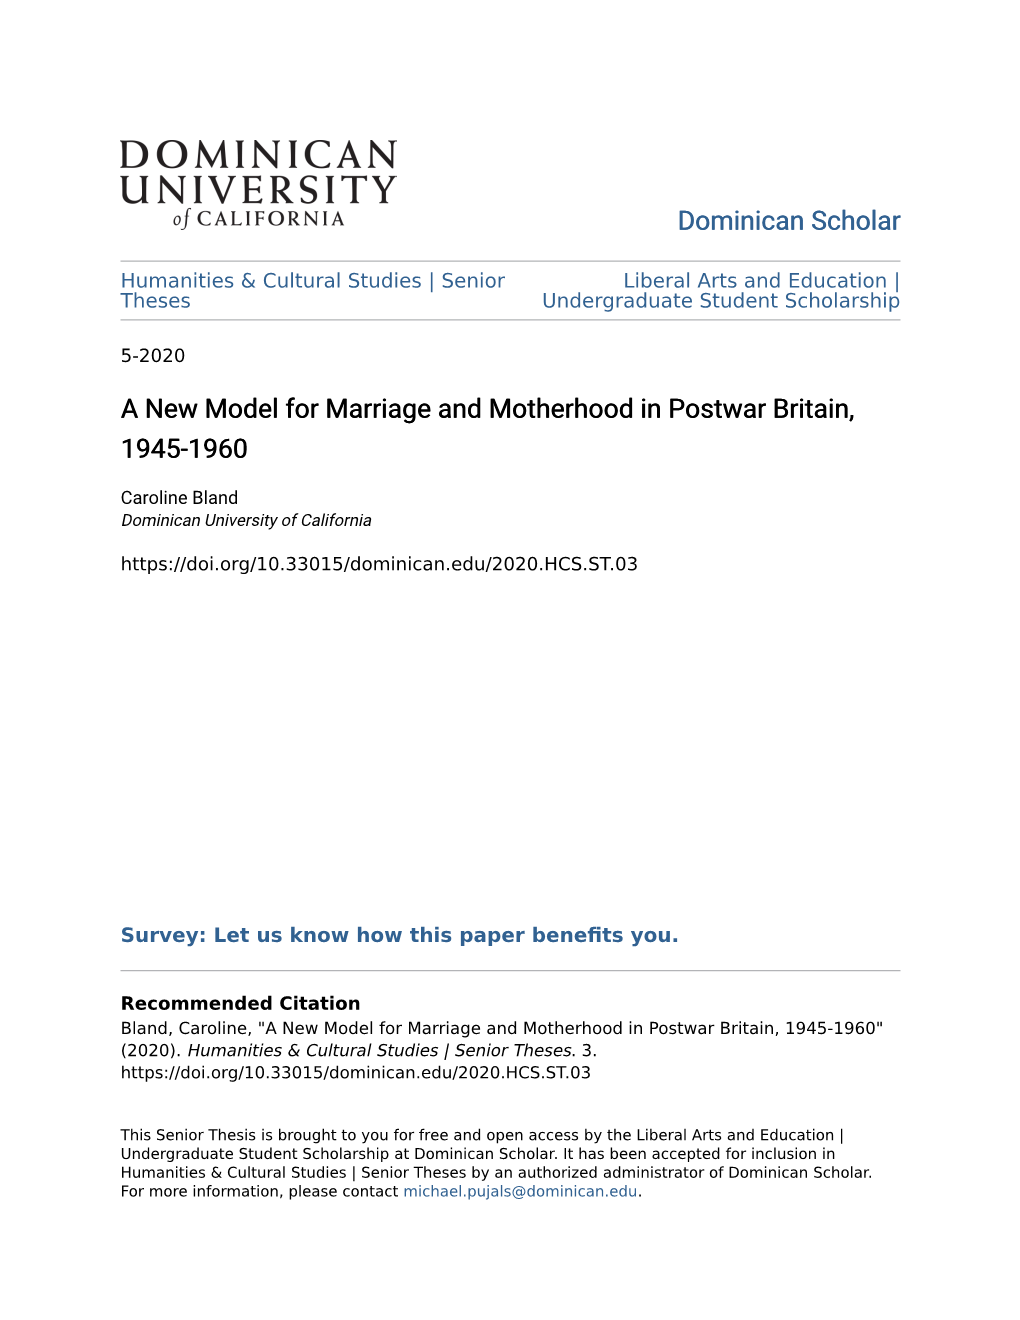 A New Model for Marriage and Motherhood in Postwar Britain, 1945-1960